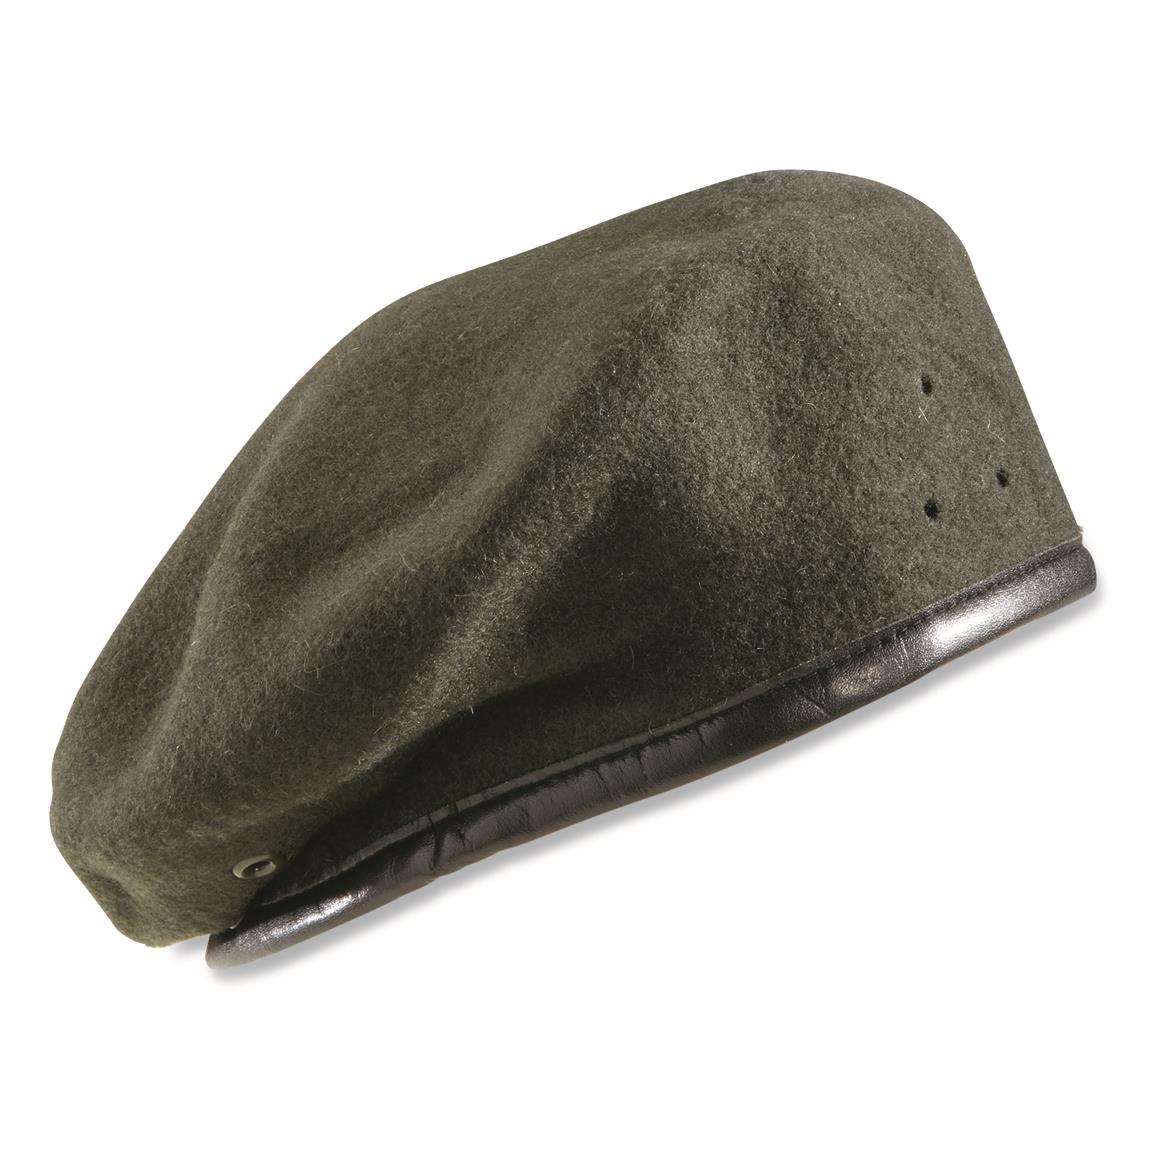 Chinese Military Surplus Wool Beret, Used, Olive Drab